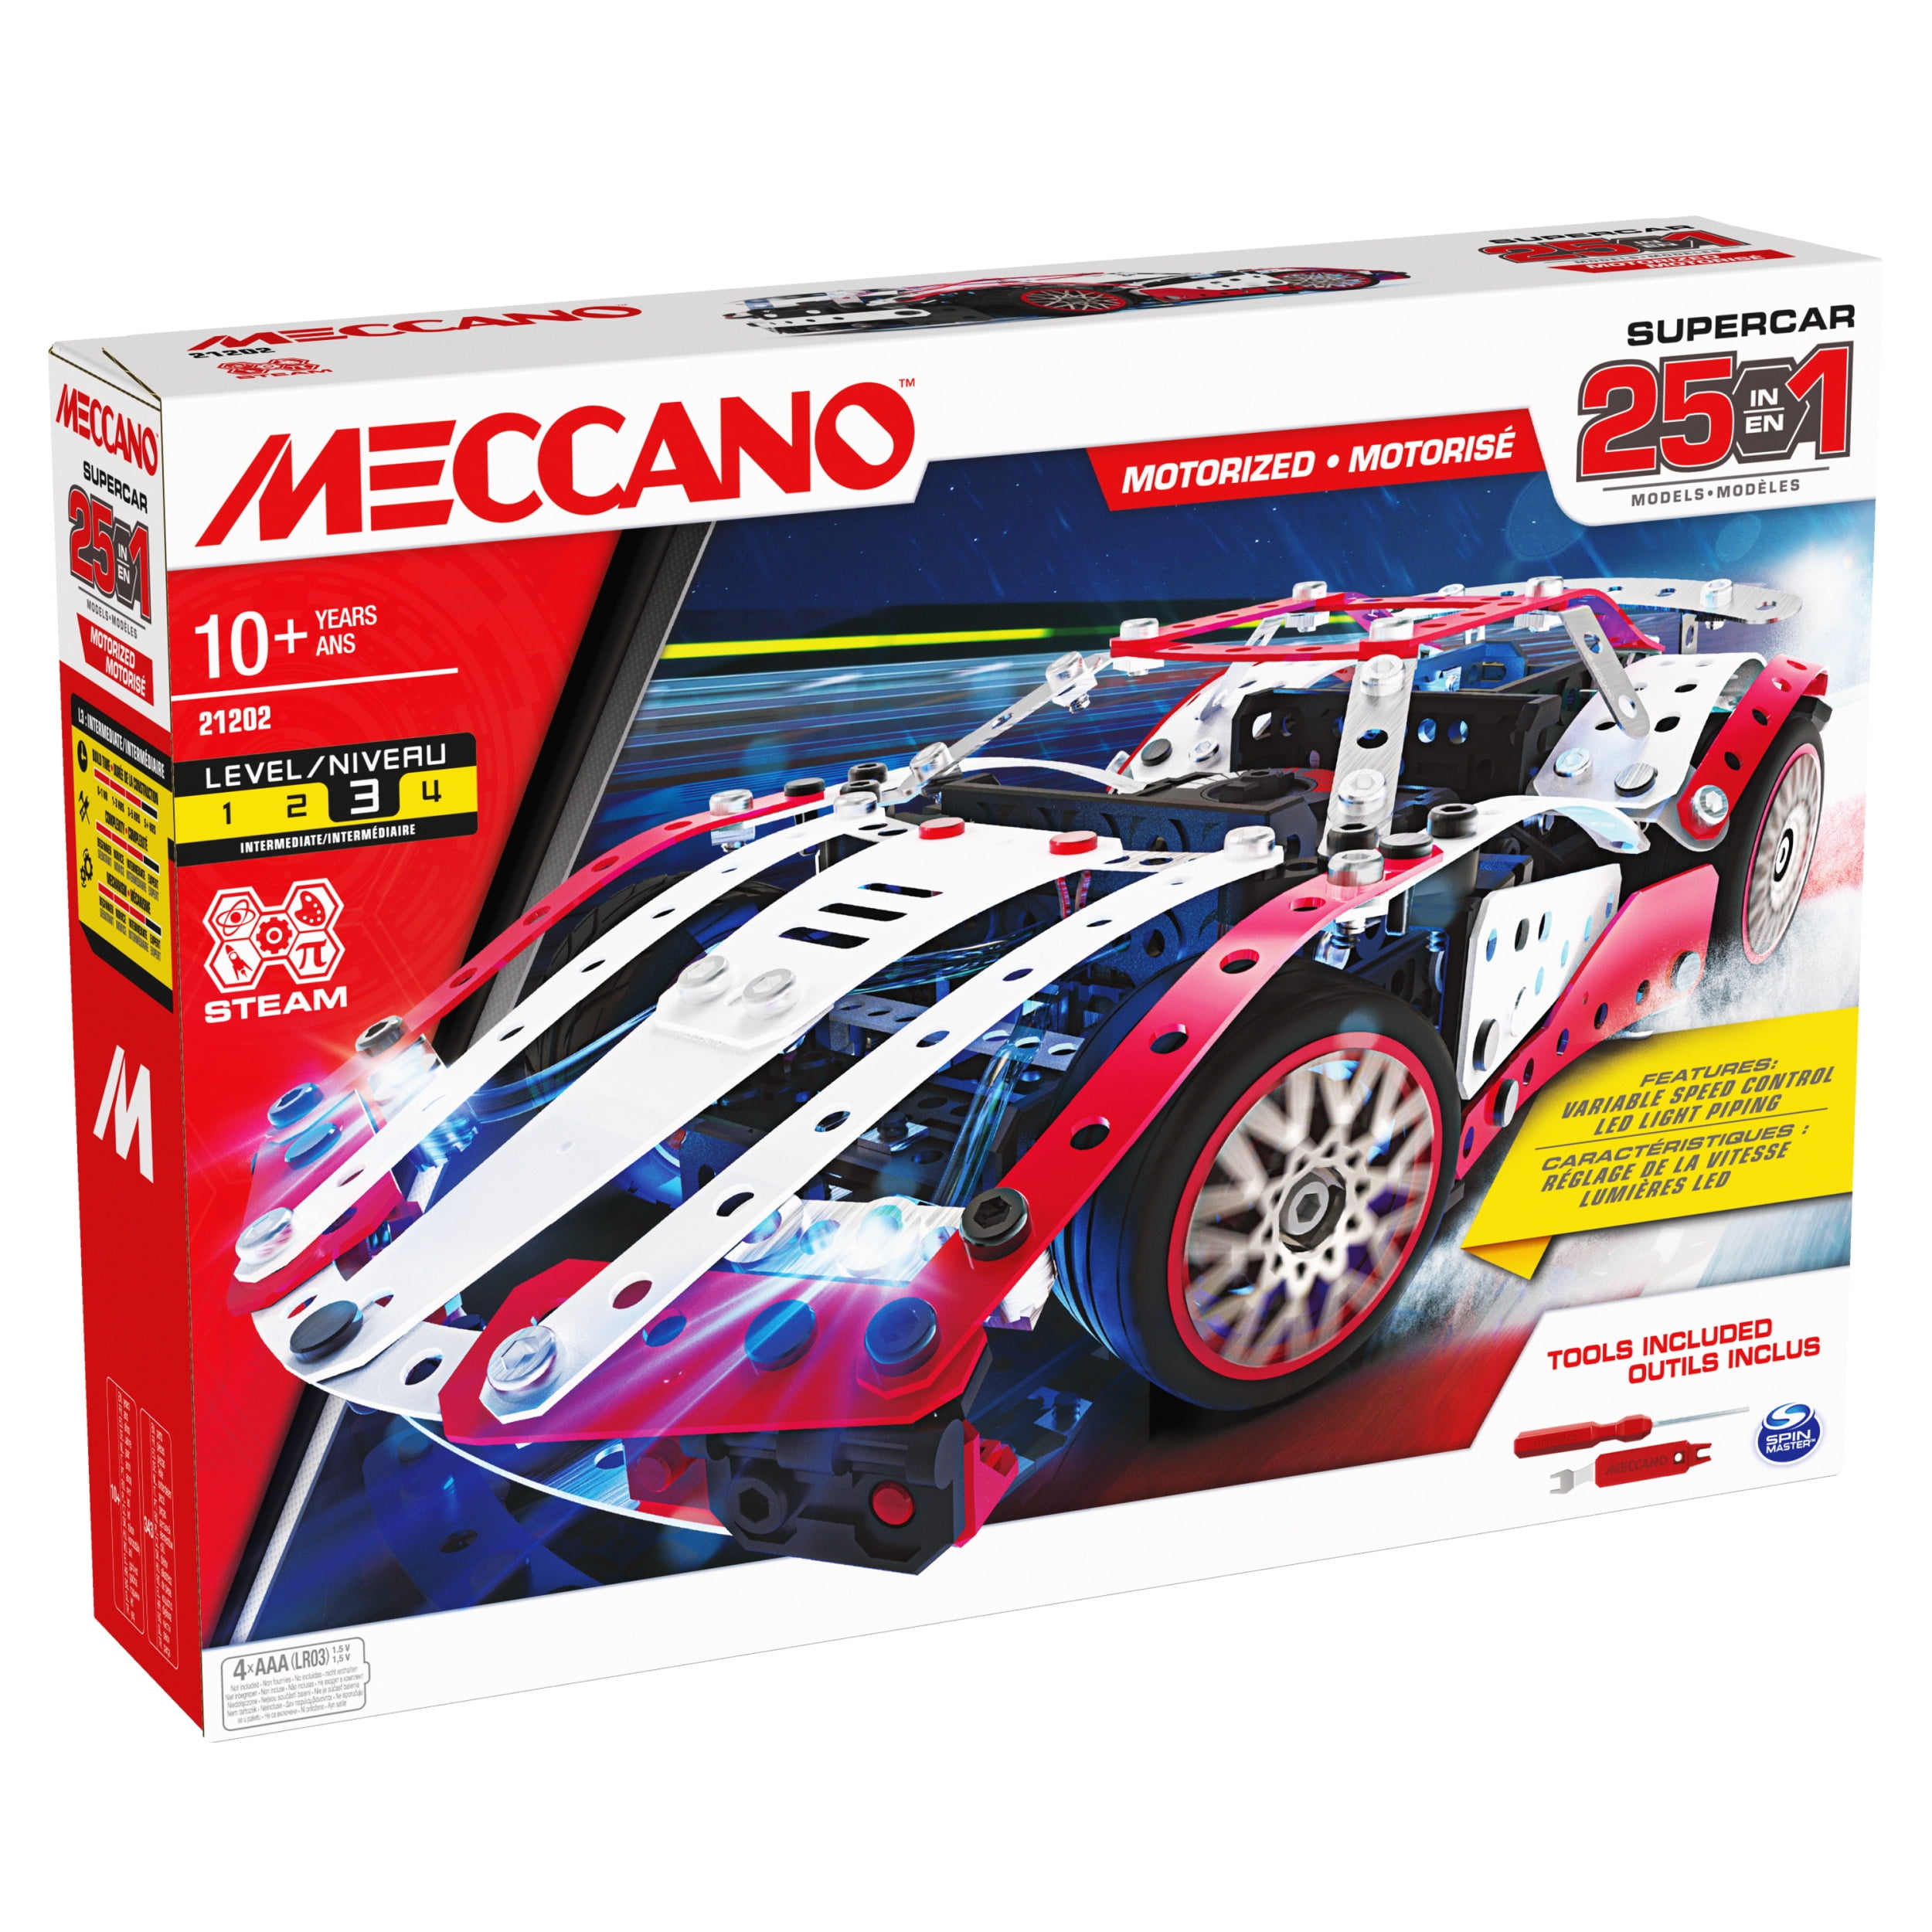 Meccano, 25-in-1 Motorized Supercar STEM Model Building Kit with 347 Parts,  Real Tools and Working Lights, Kids Toys for Ages 10 and up 